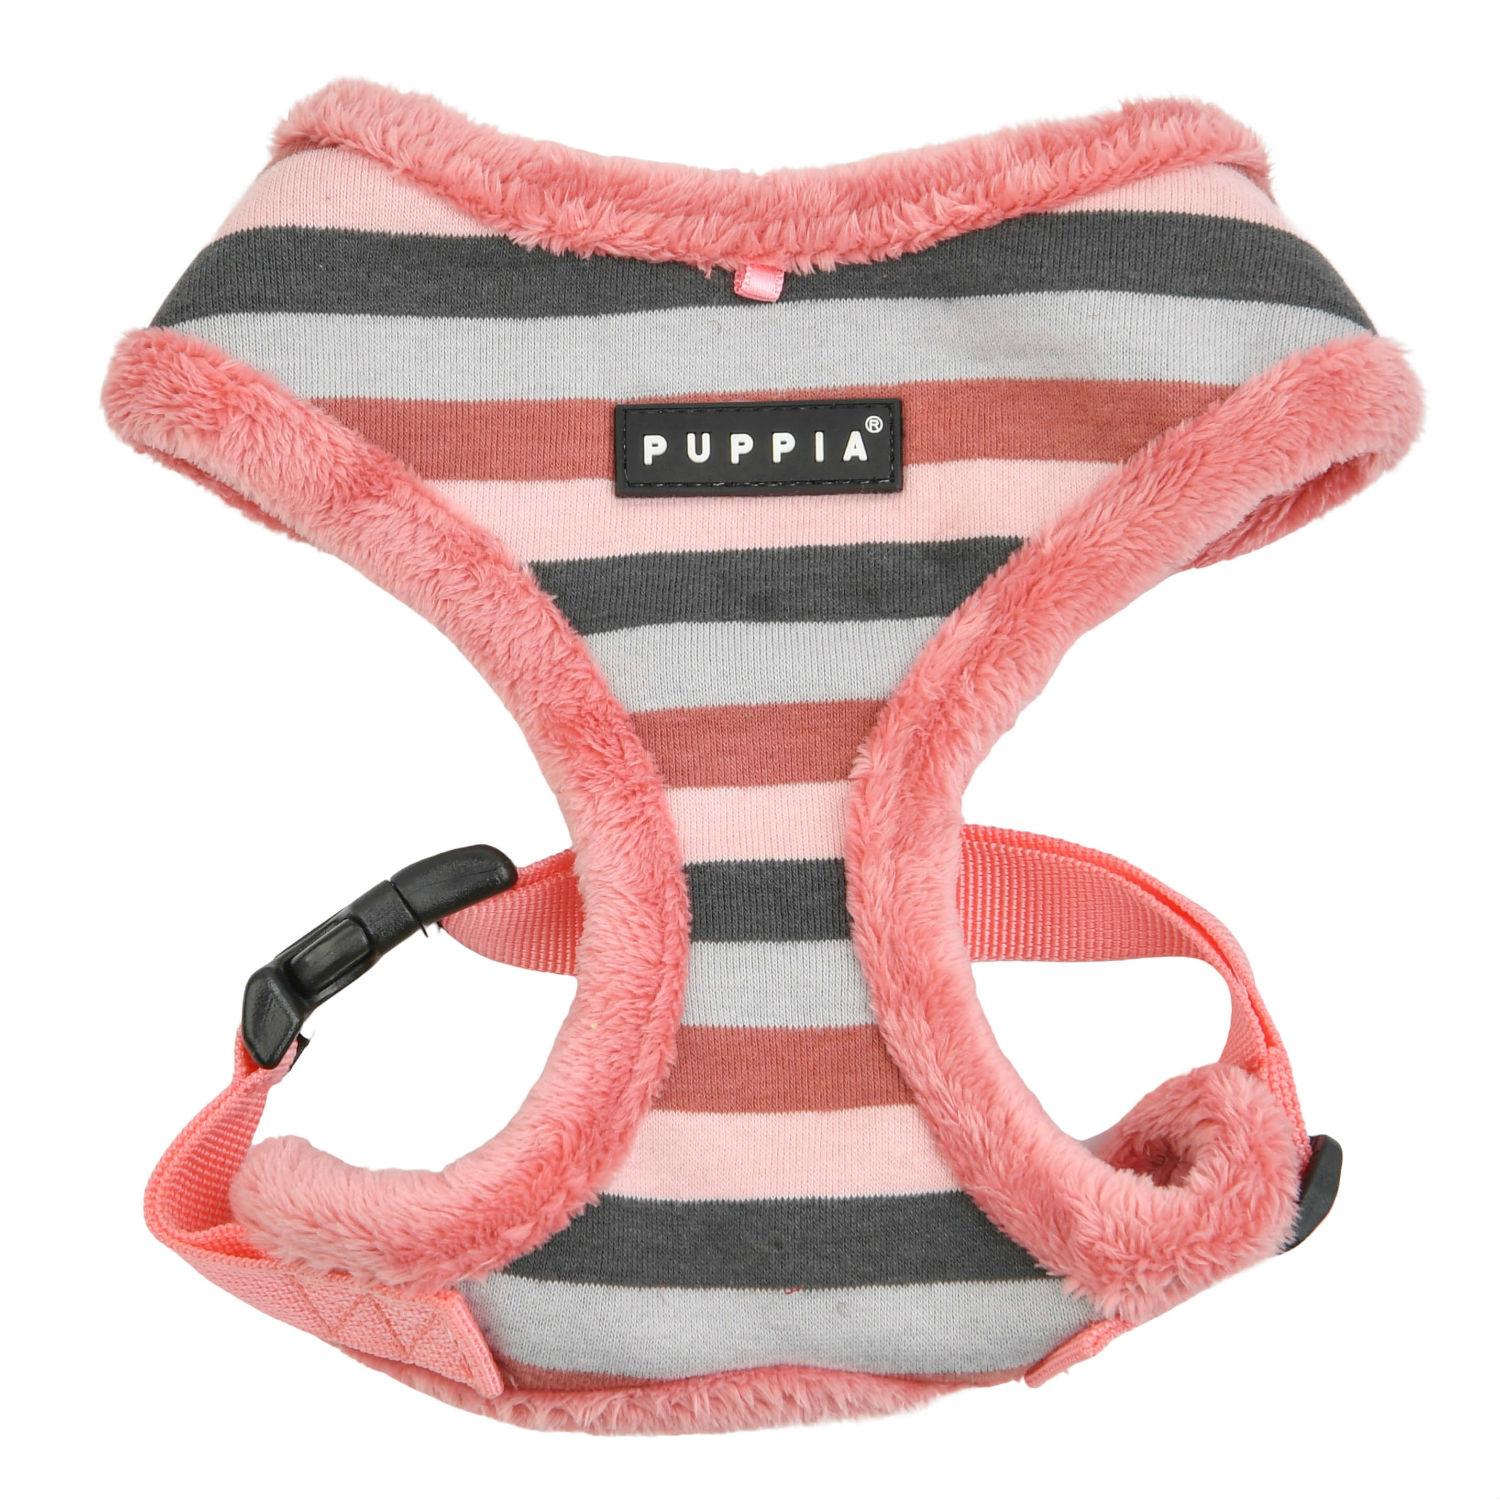 Bryson Basic Style Dog Harness By Puppia - Indian Pink